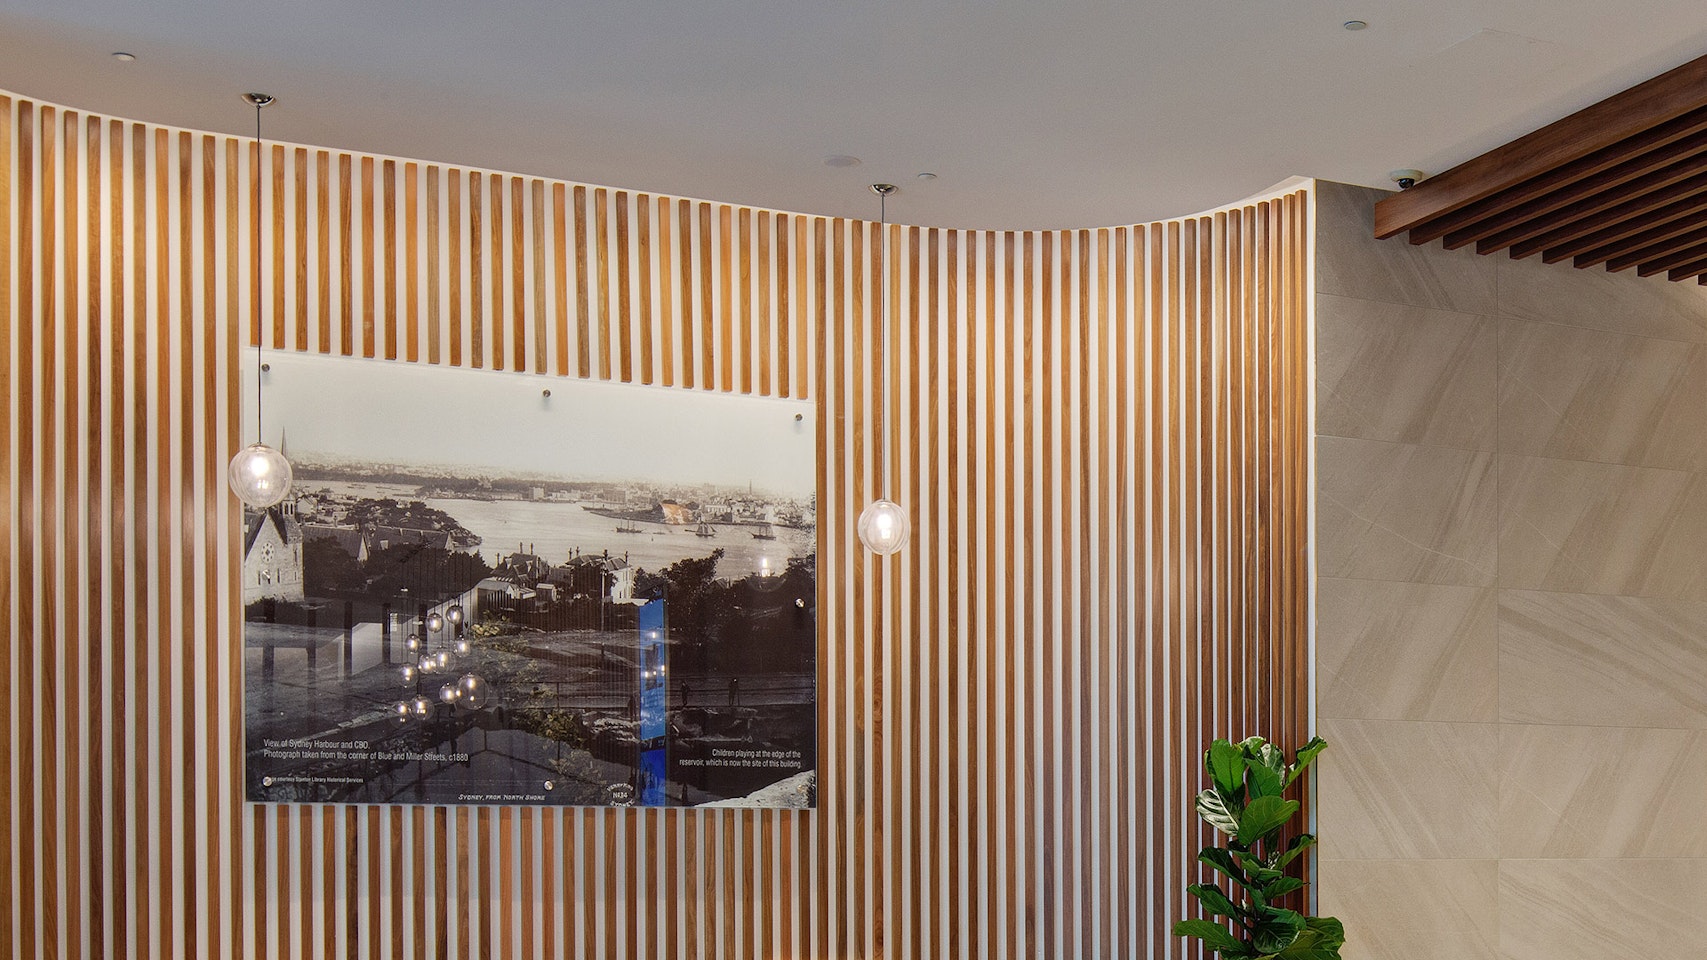 Precise illumination of the lobby features at 40 Miller Street, including grazing timber panelling on curved walls with Aduro CL.